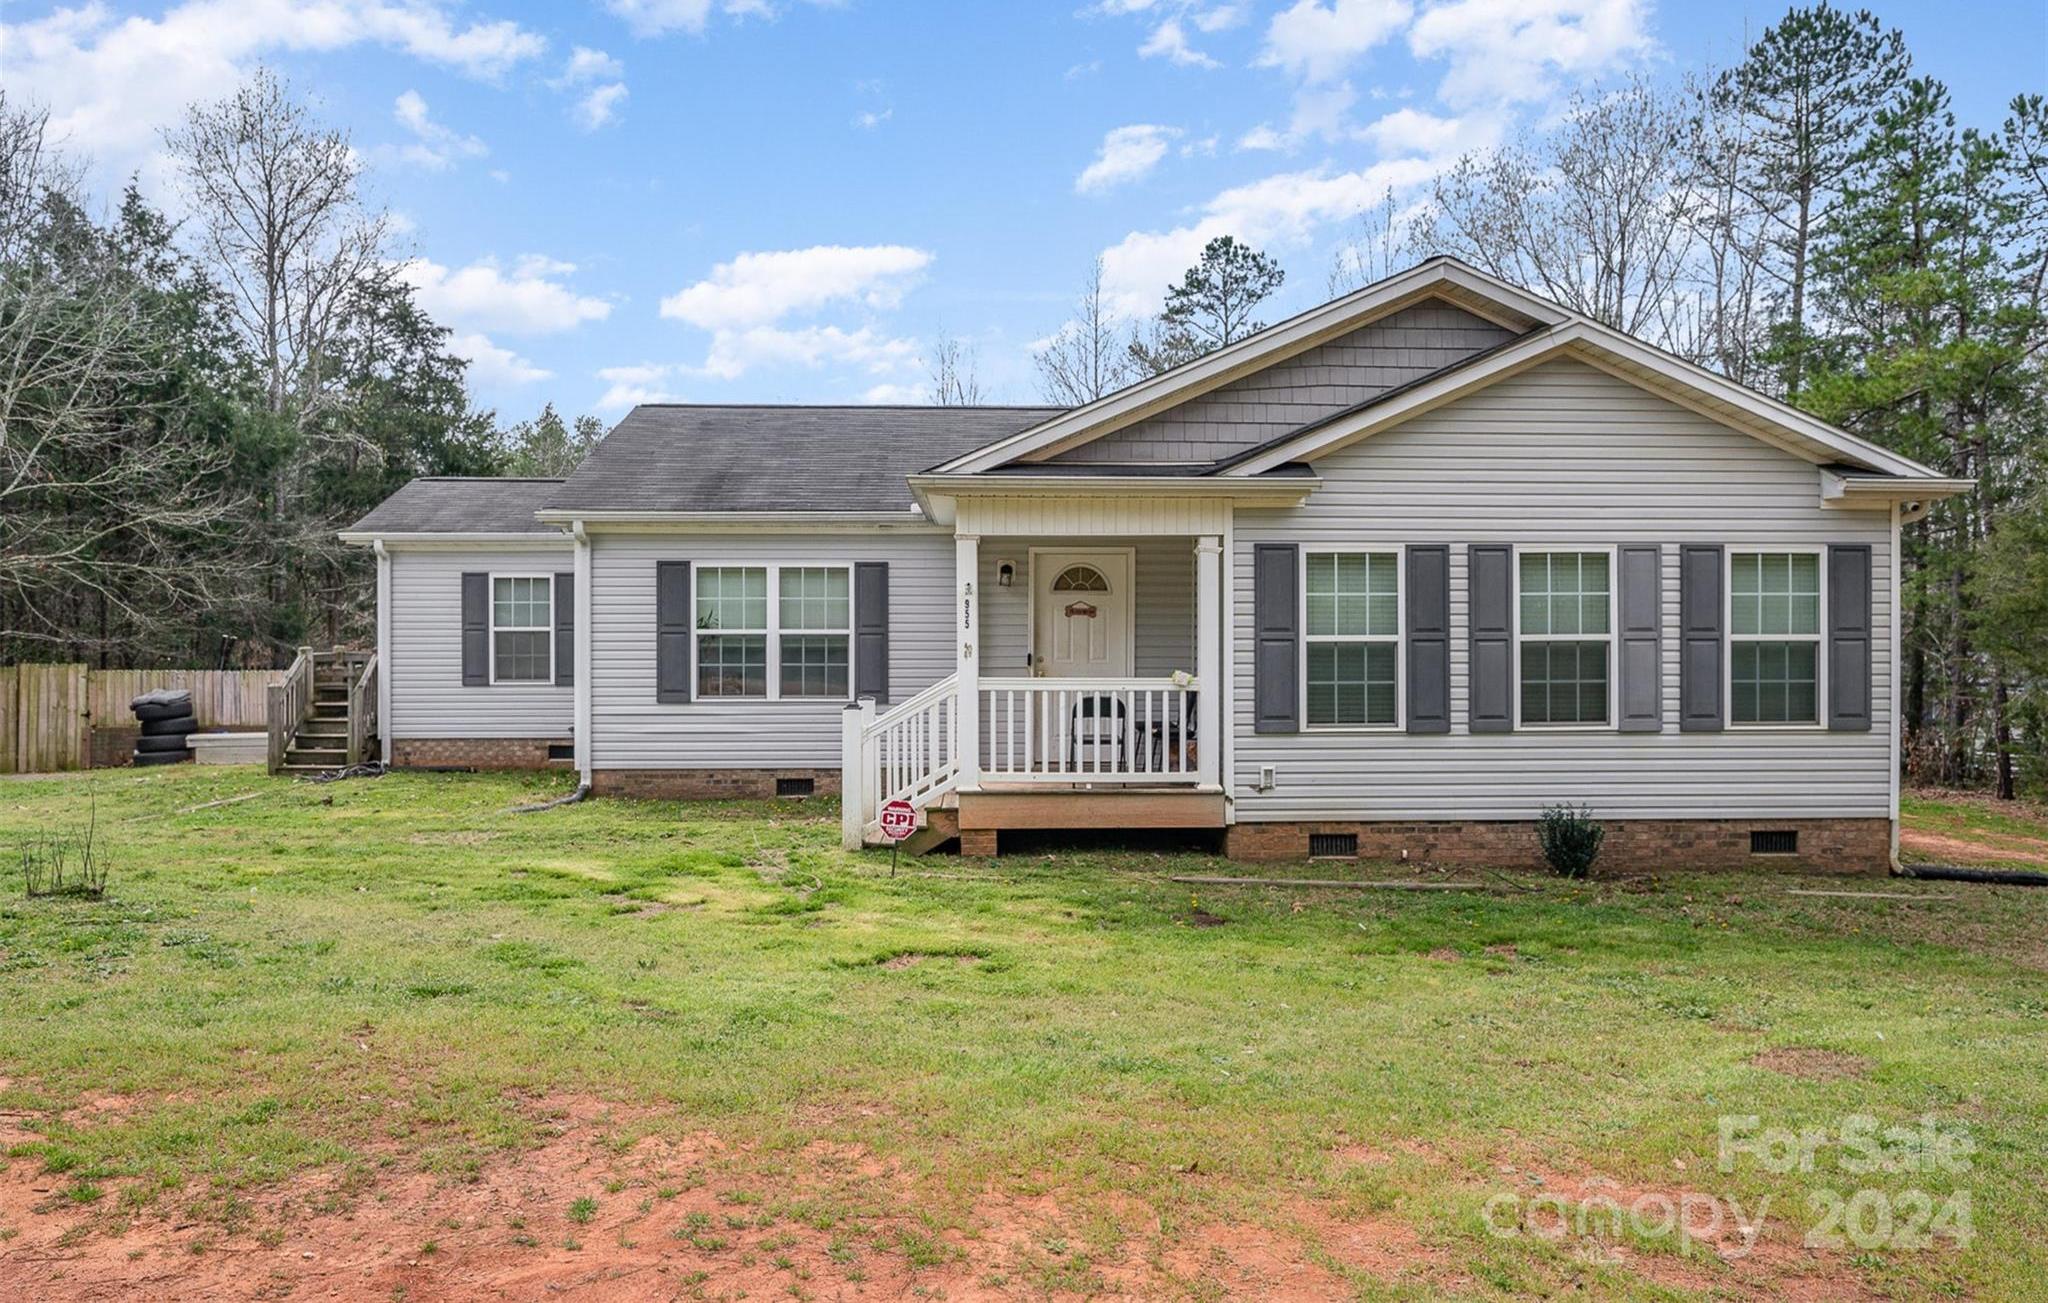 Photo one of 955 Rock Hill Hwy Lancaster SC 29720 | MLS 4115677